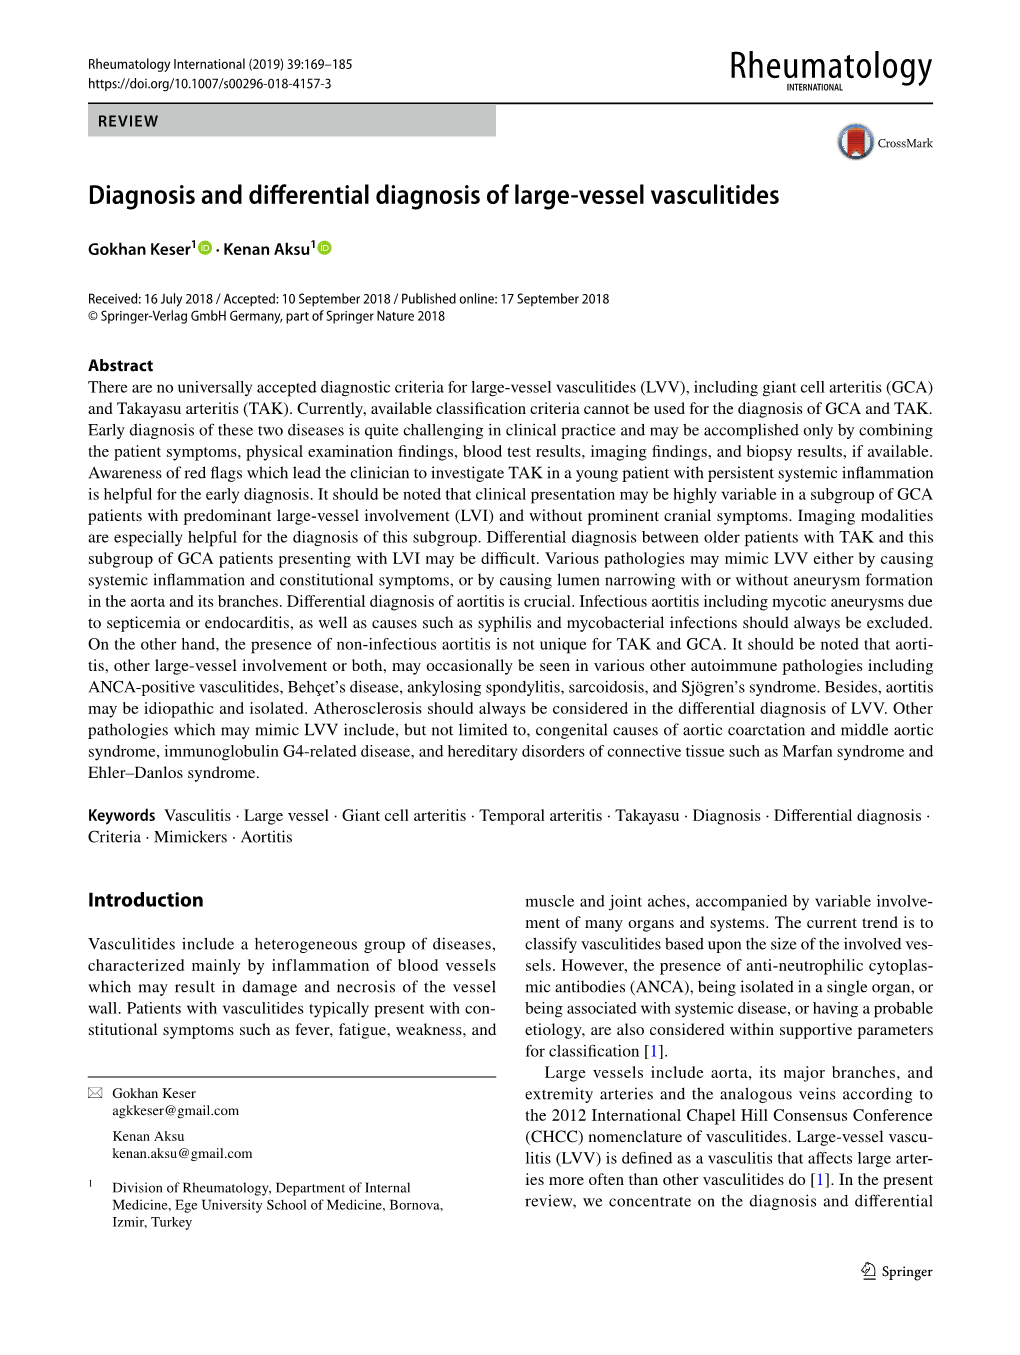 Diagnosis and Differential Diagnosis of Large-Vessel Vasculitides